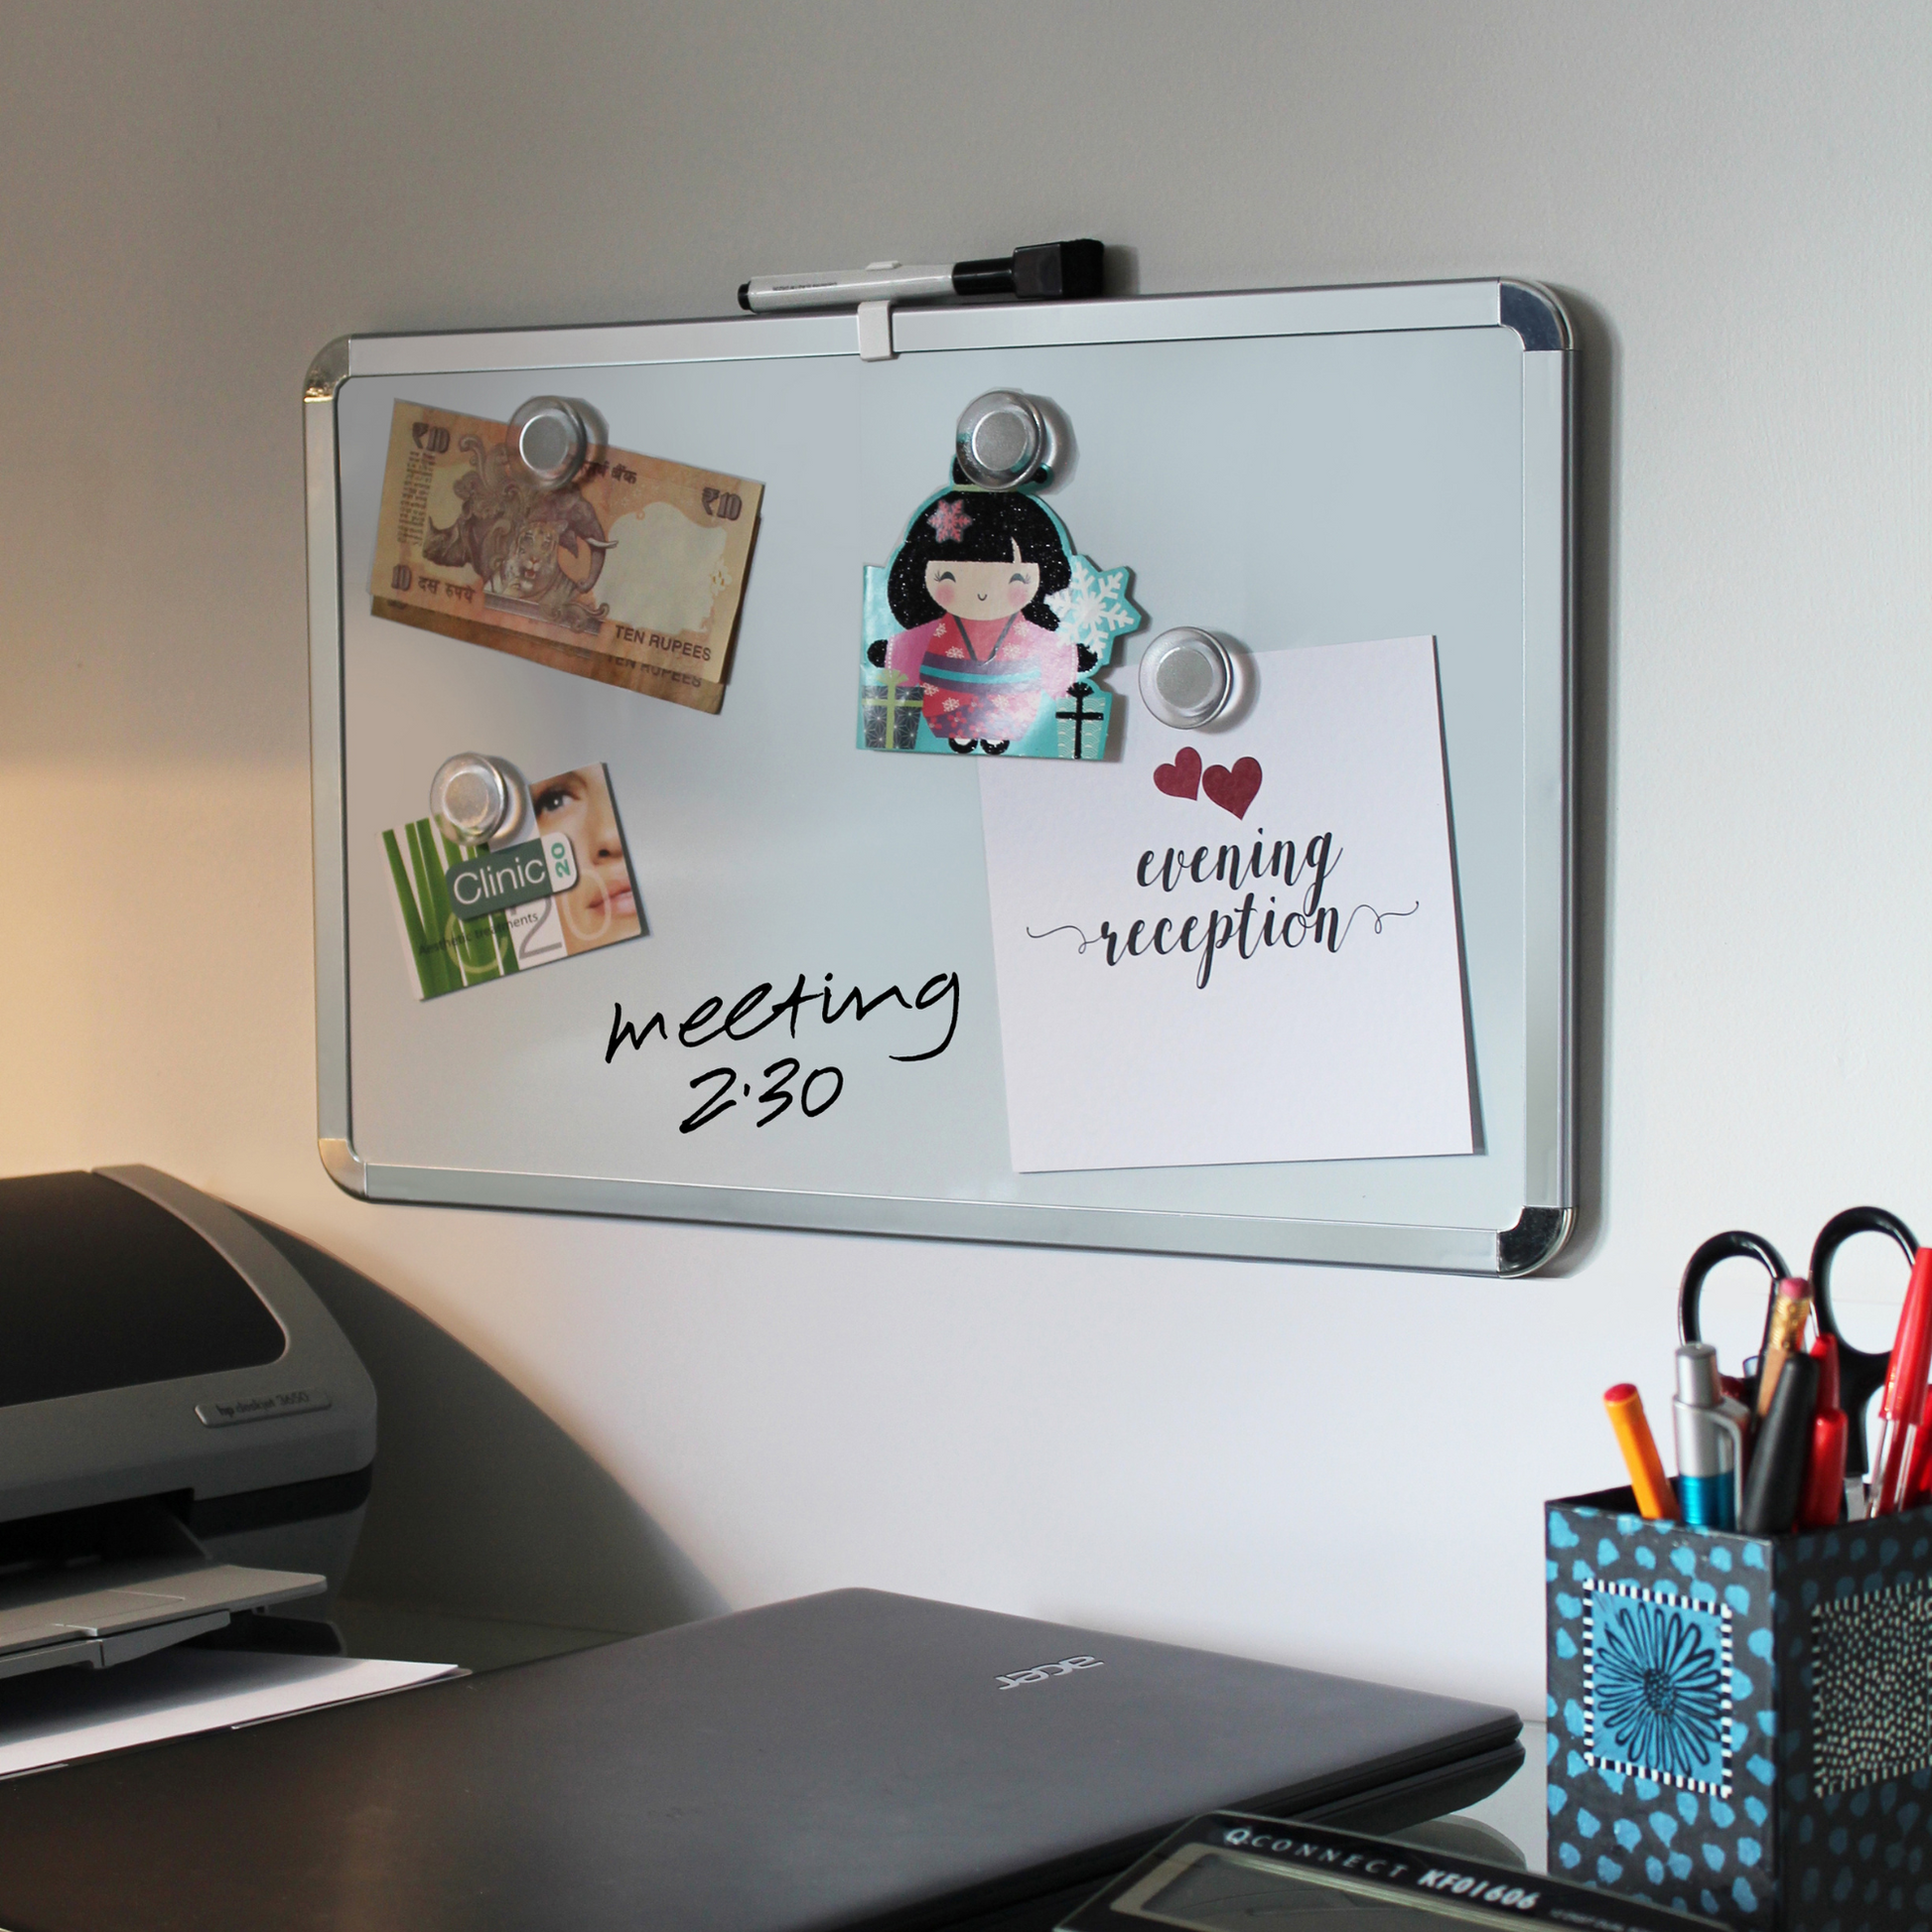 A 28x43cm dry erase board with chrome corners is mounted on a wall, displaying various notes and magnets. Items on the board include a ten rupee note, a cartoon shaped card, a clinic appointment card, wedding invitation, and a handwritten note saying 'meeting 2:30'. A closed laptop and a container holding pens and scissors sit on a desk below the board, displaying the versatile applications of the whiteboard.